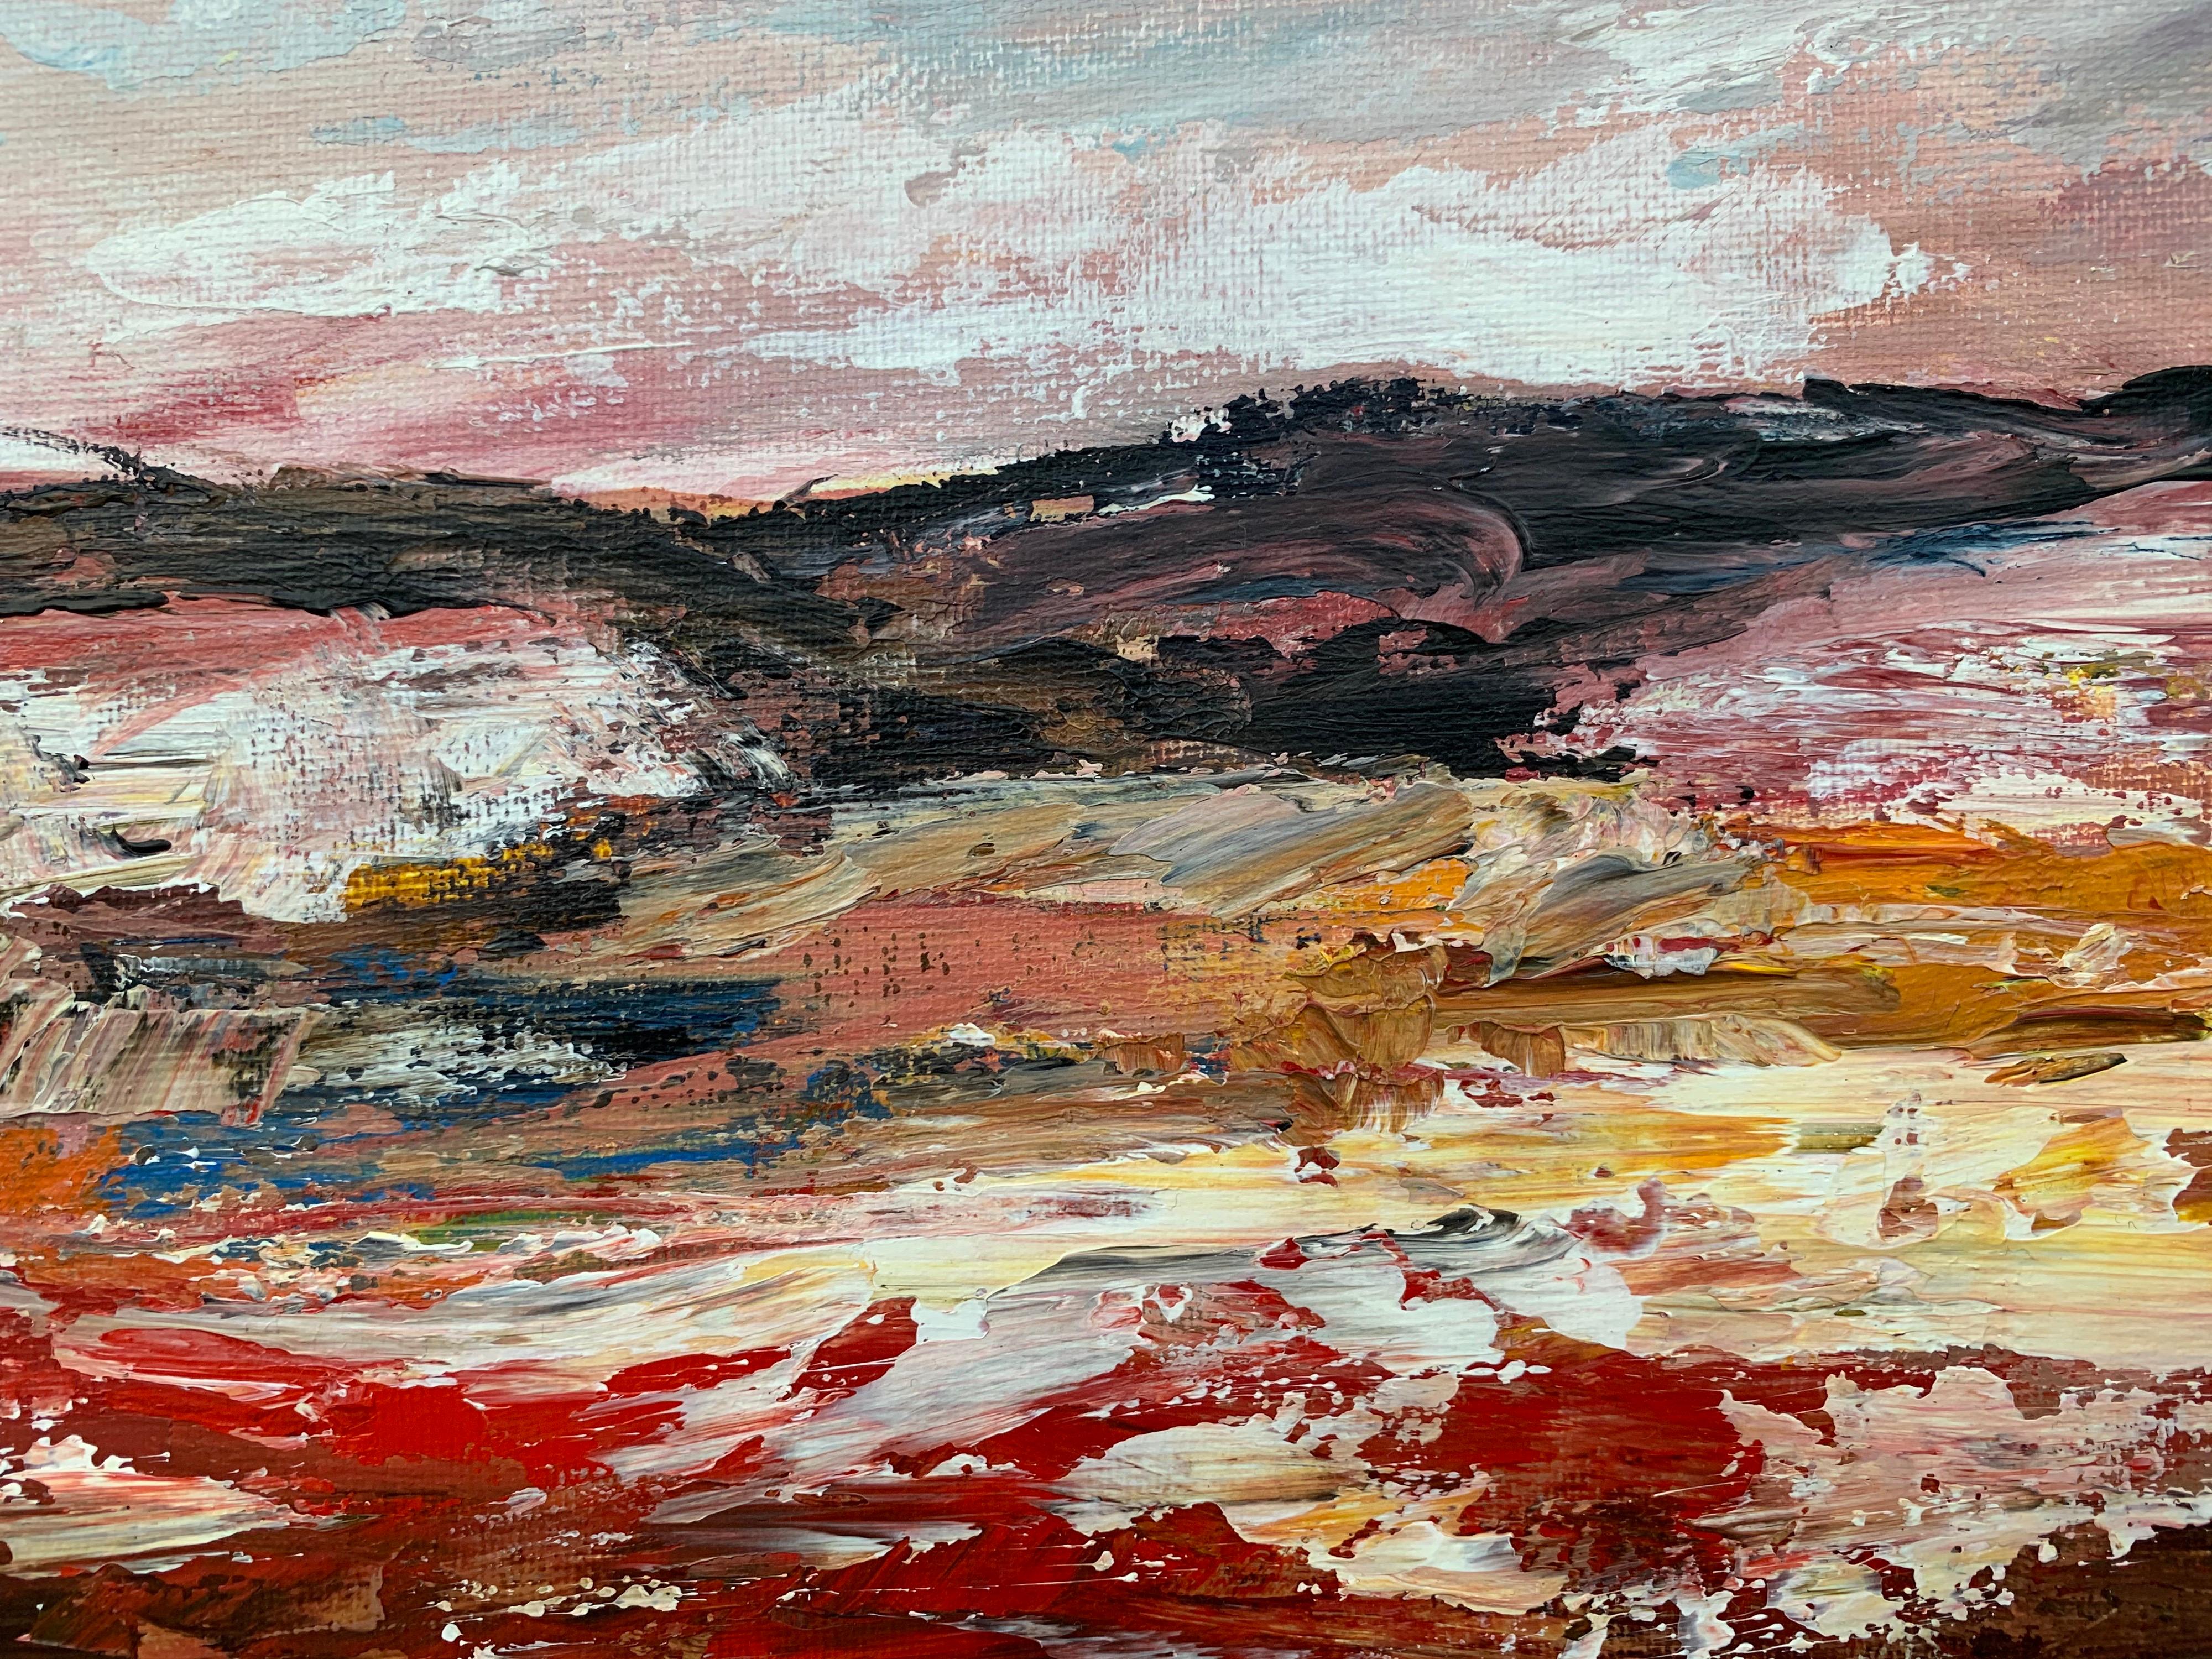 Abstract Landscape Study using Earthy Brown Colours by Leading English Artist For Sale 6